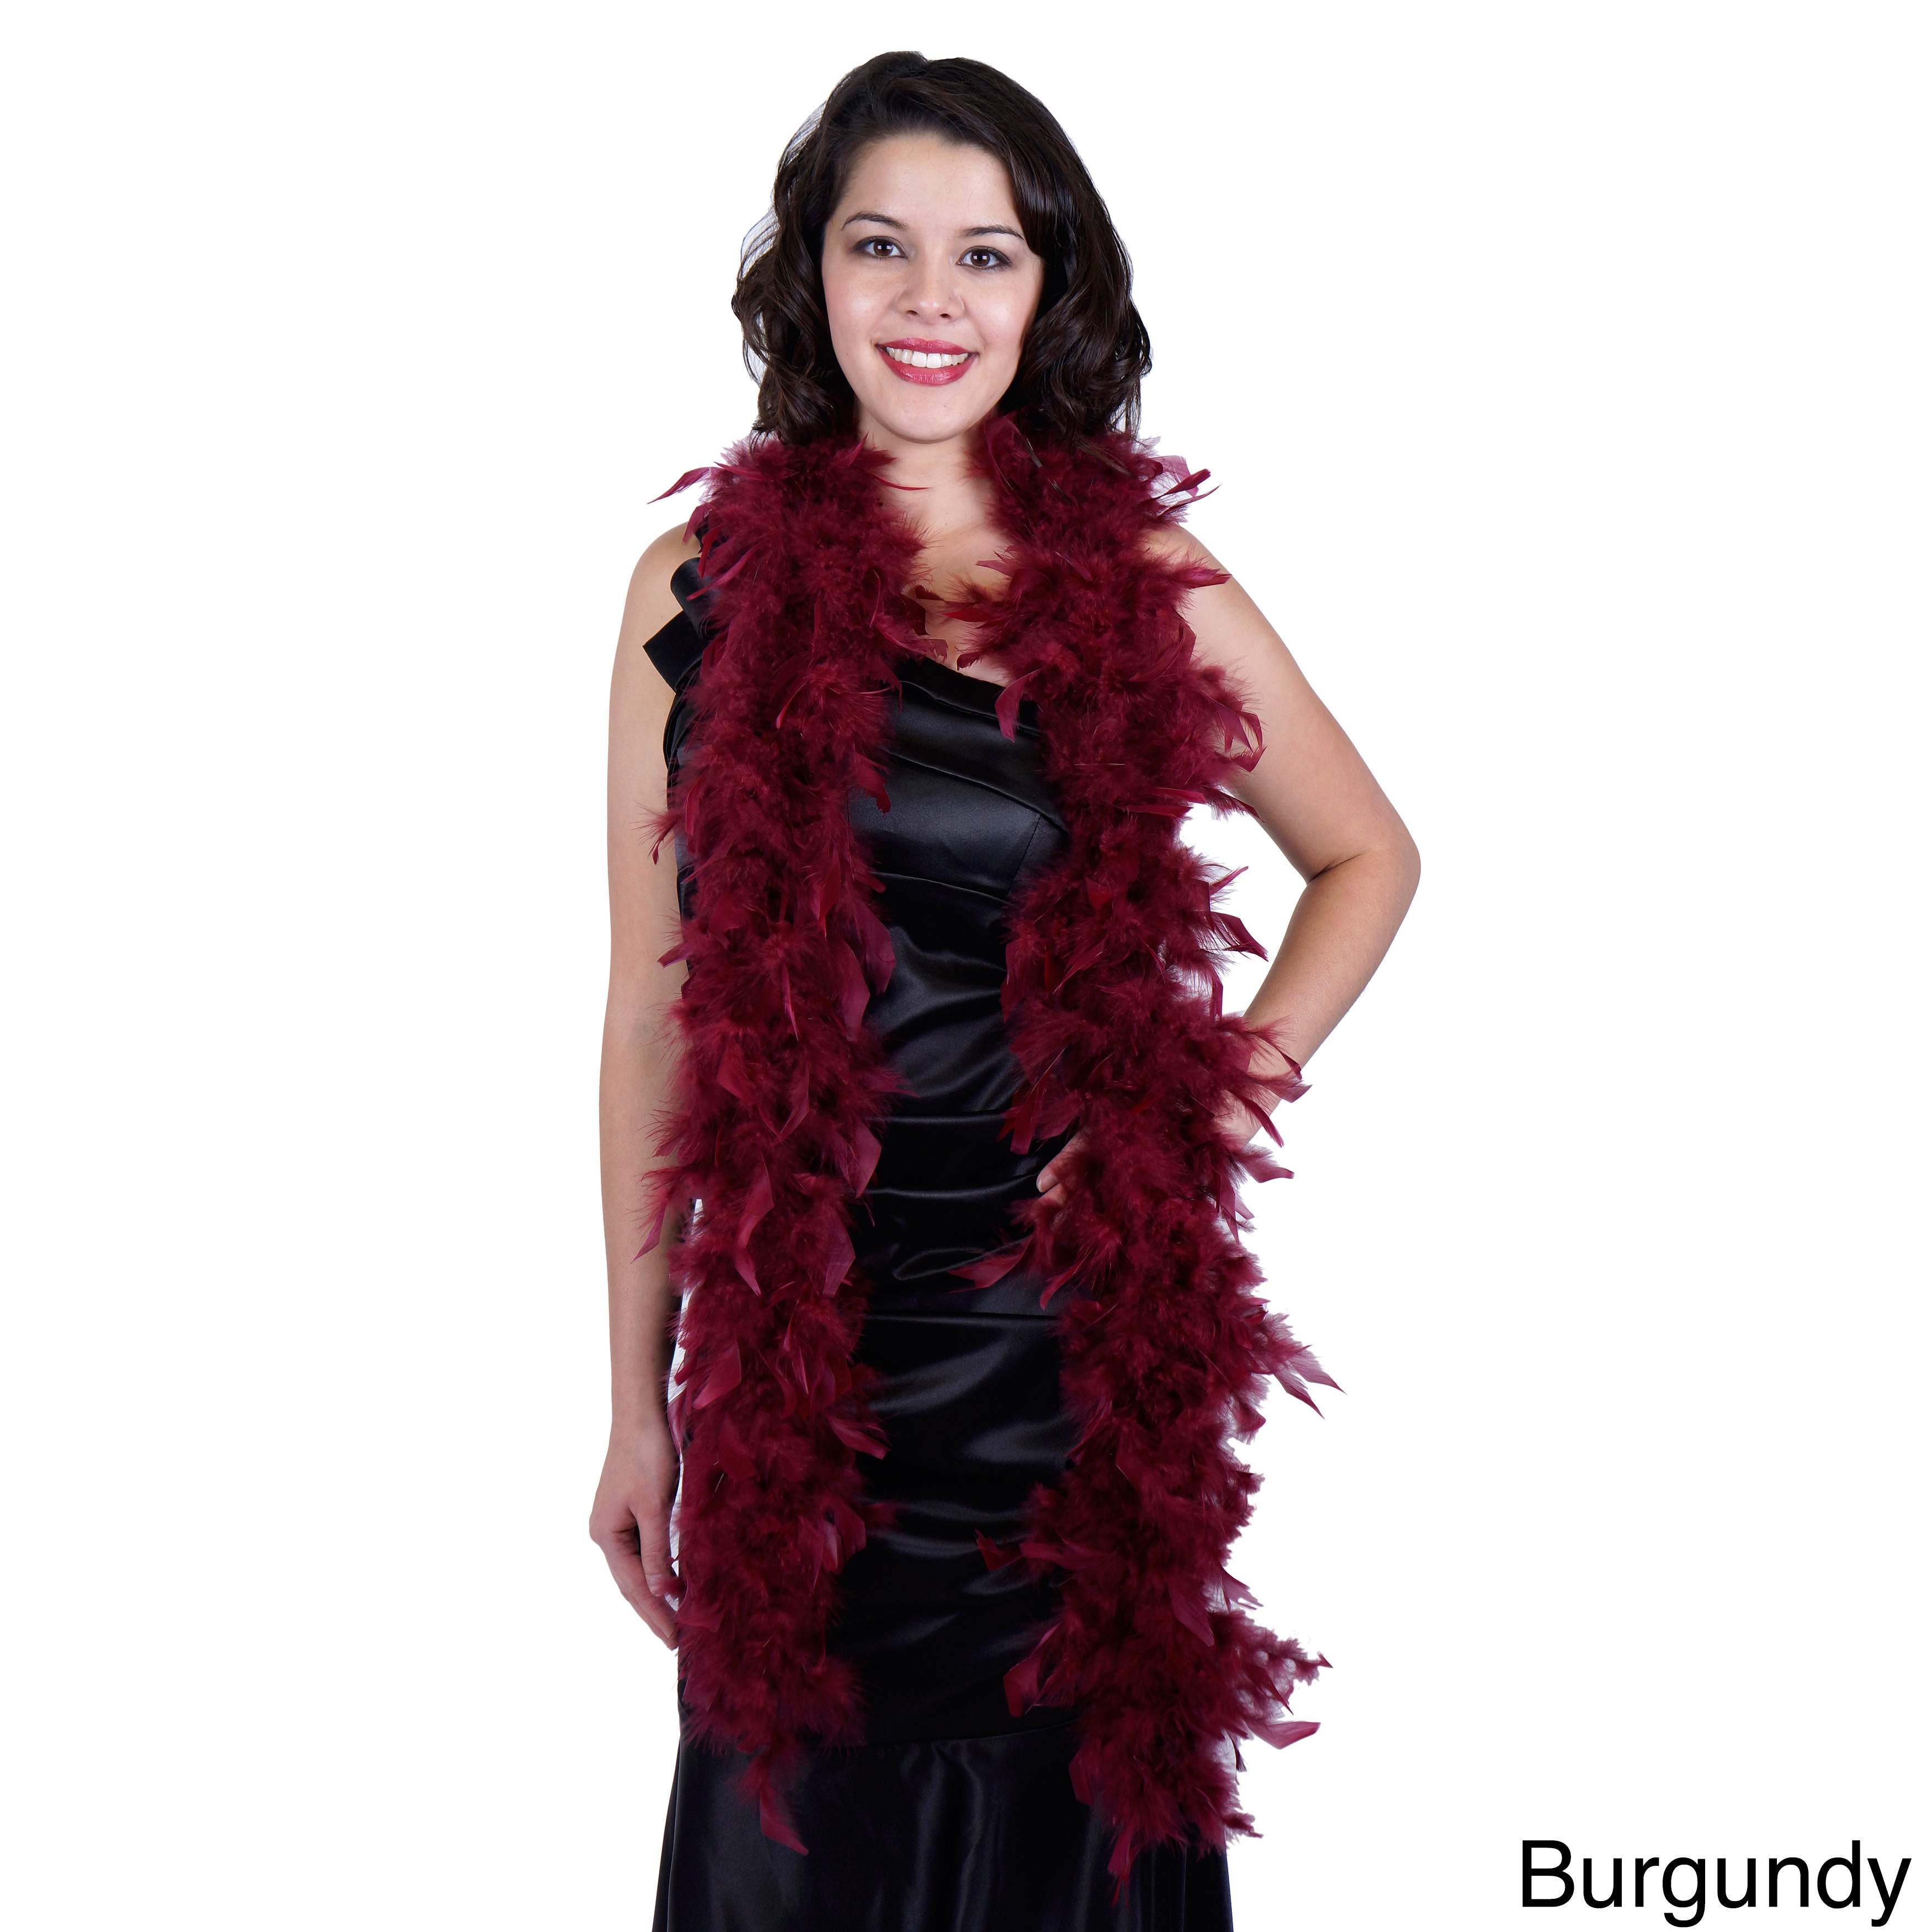 Zucker Feather Products Chandelle Feather Boa - image 4 of 5